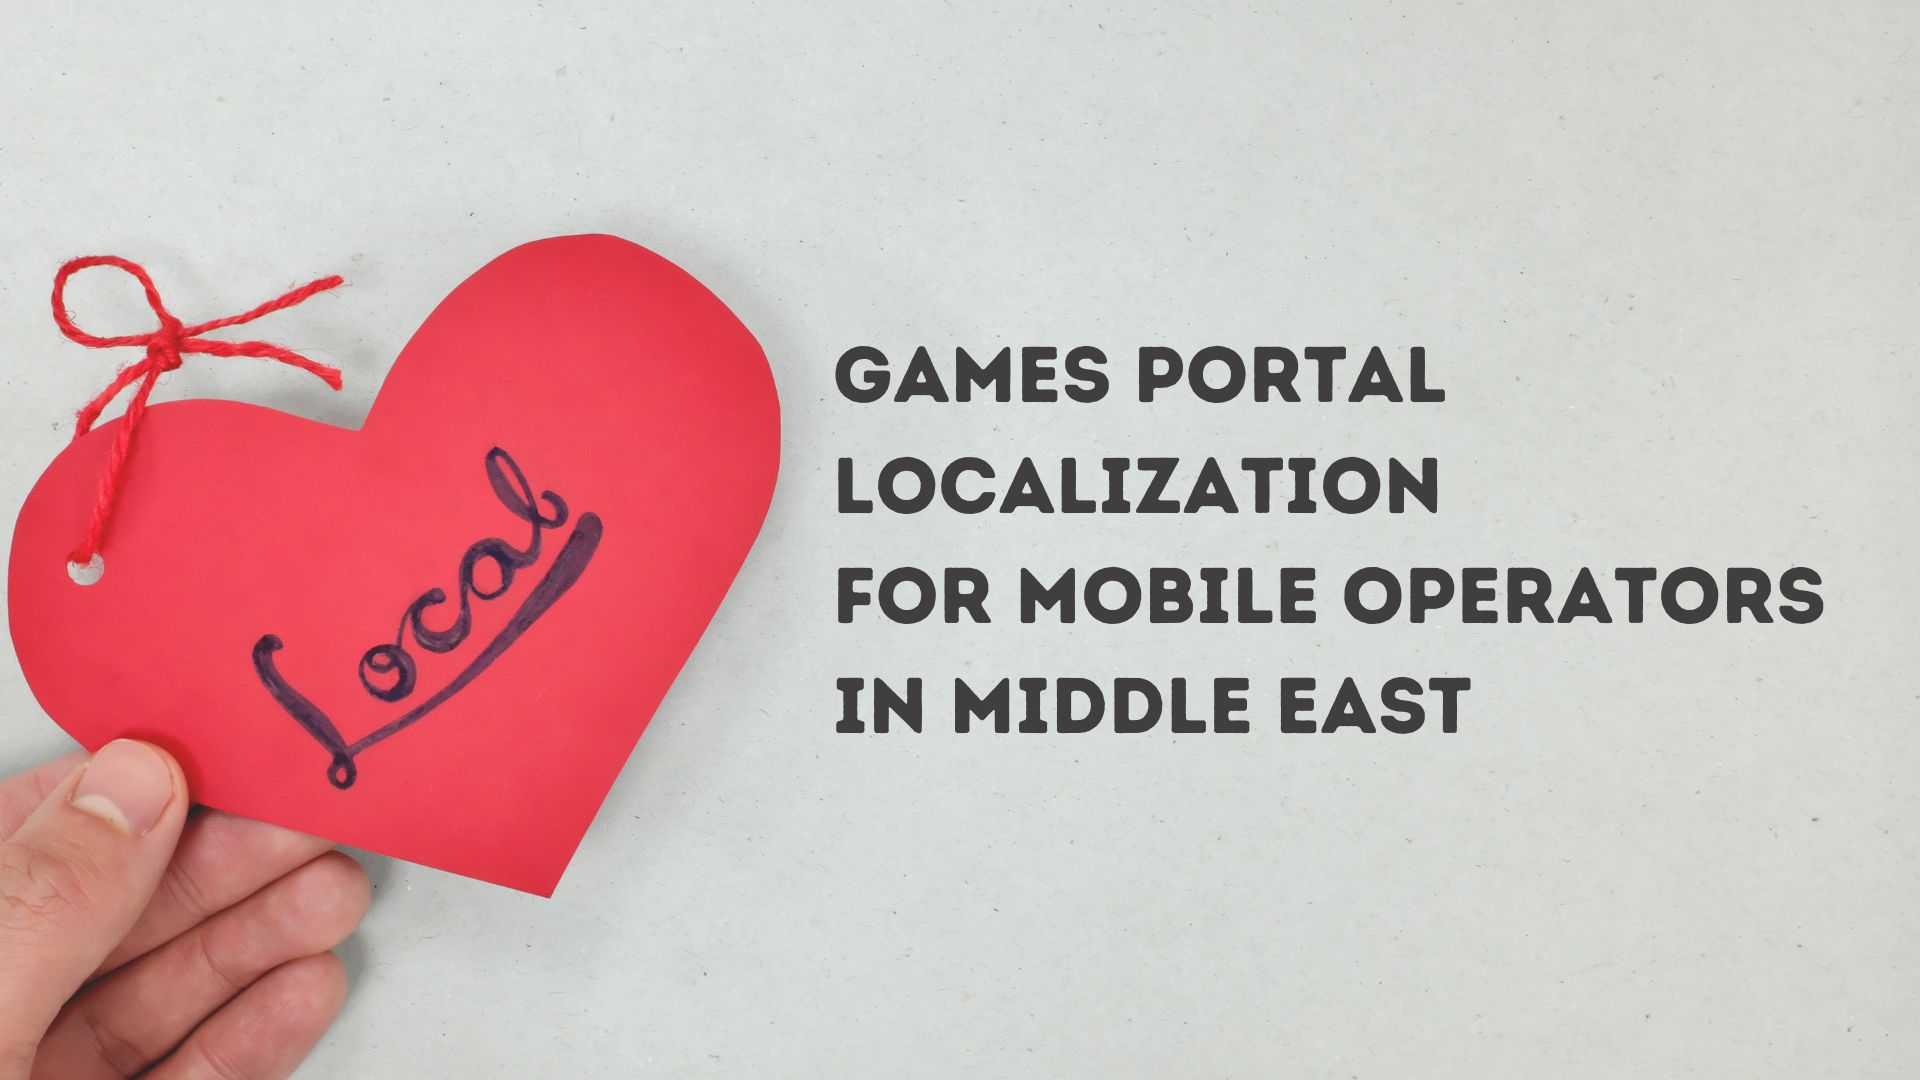 Games Portal Localization for Mobile Operators in Middle East